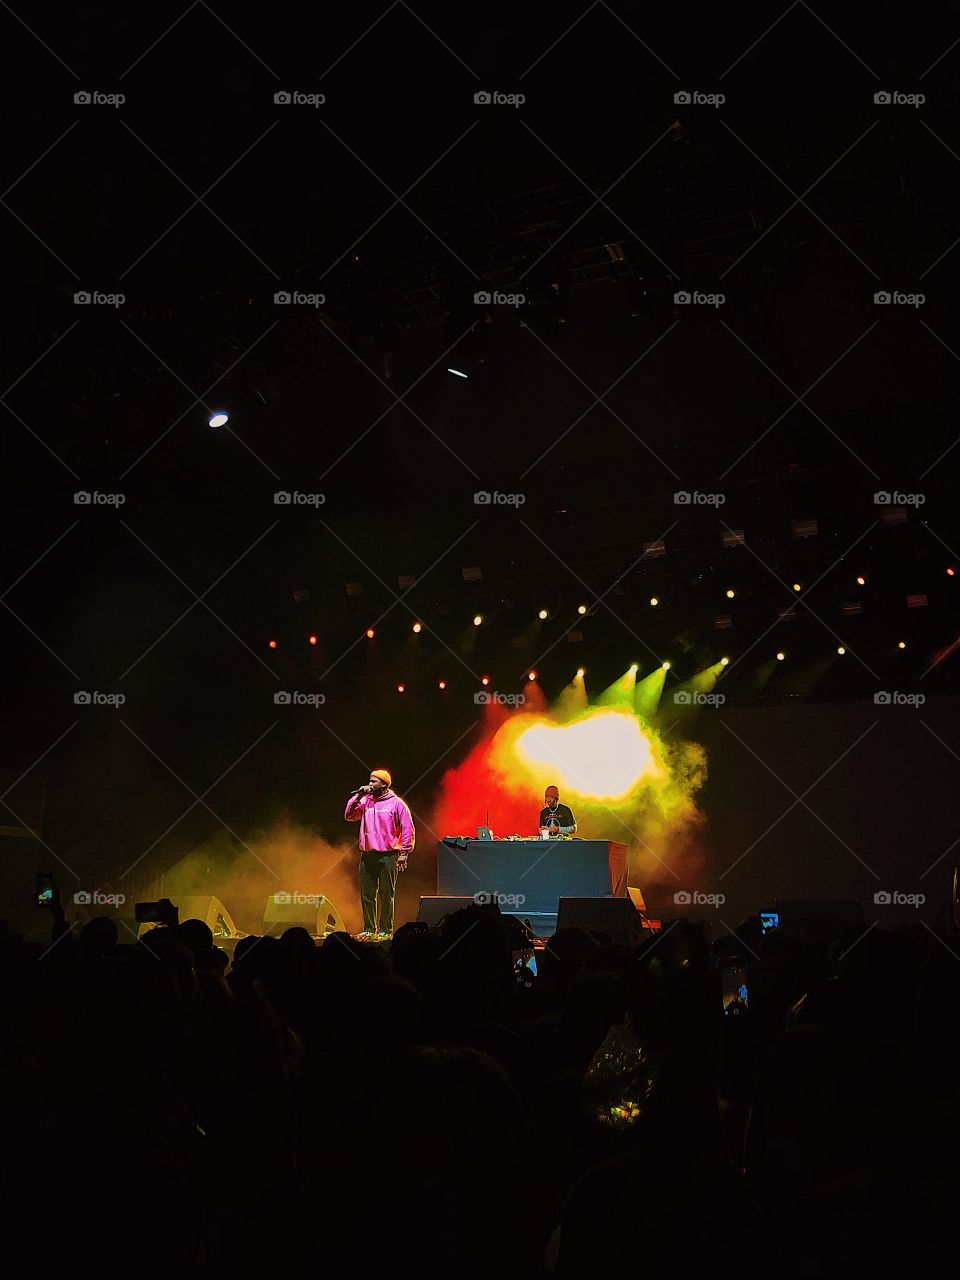 Schoolboy Q performing at smokers club festival in Long Beach California, 2018.